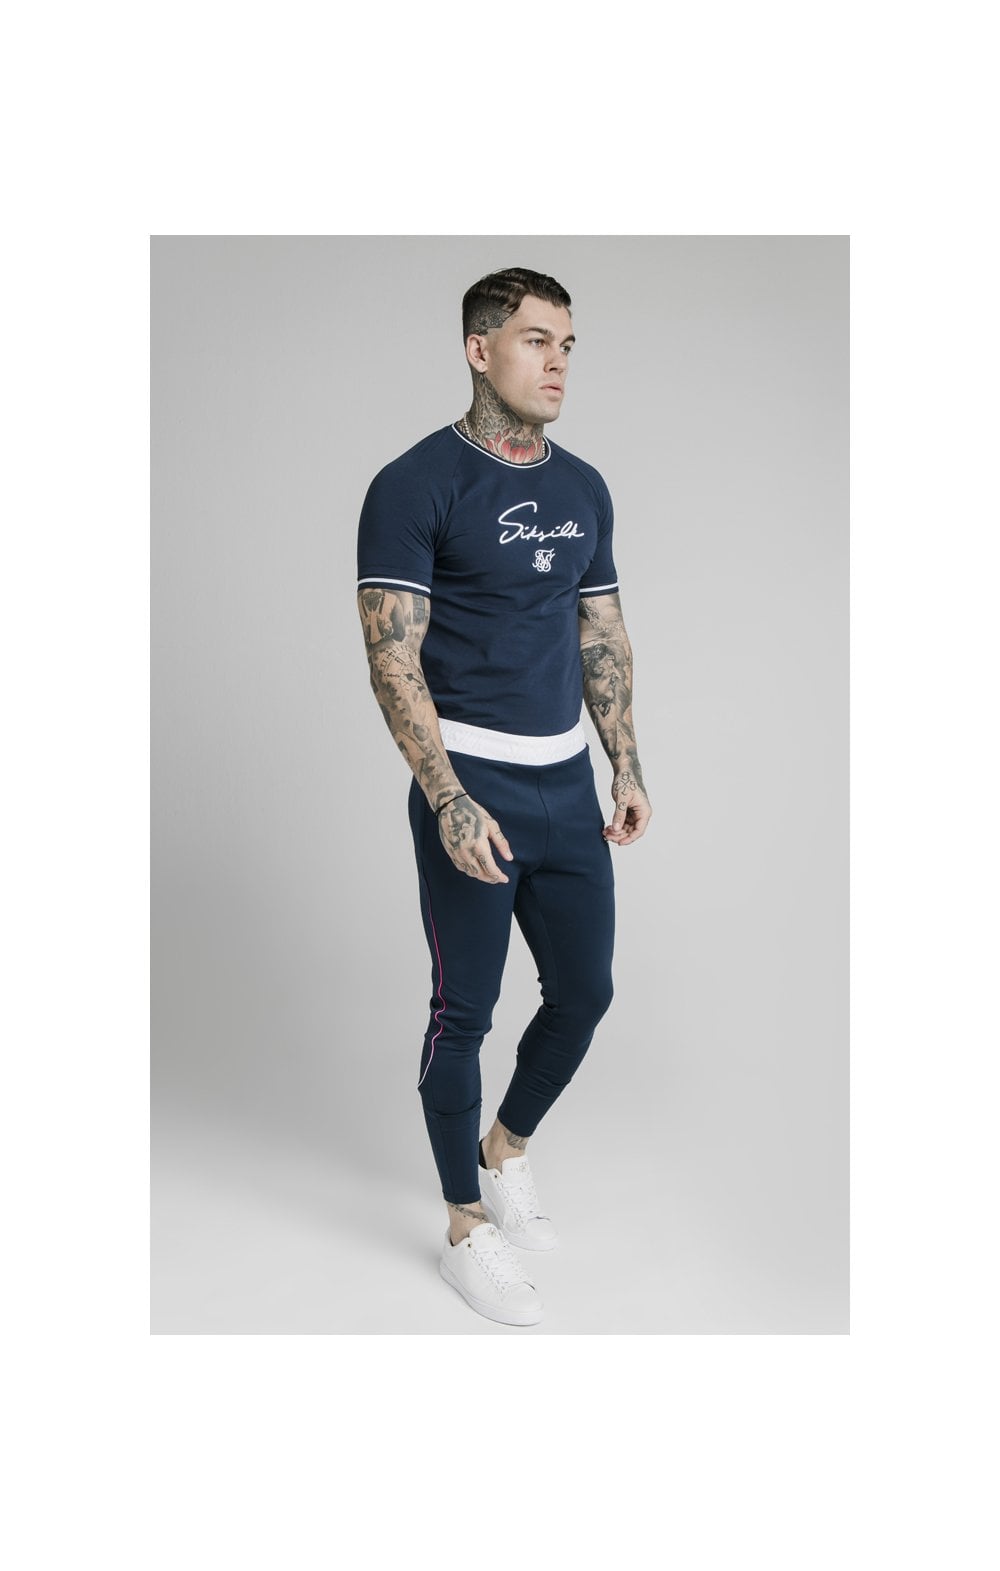 Load image into Gallery viewer, SikSilk Athlete Prestige Fade Track Pants - Navy (5)